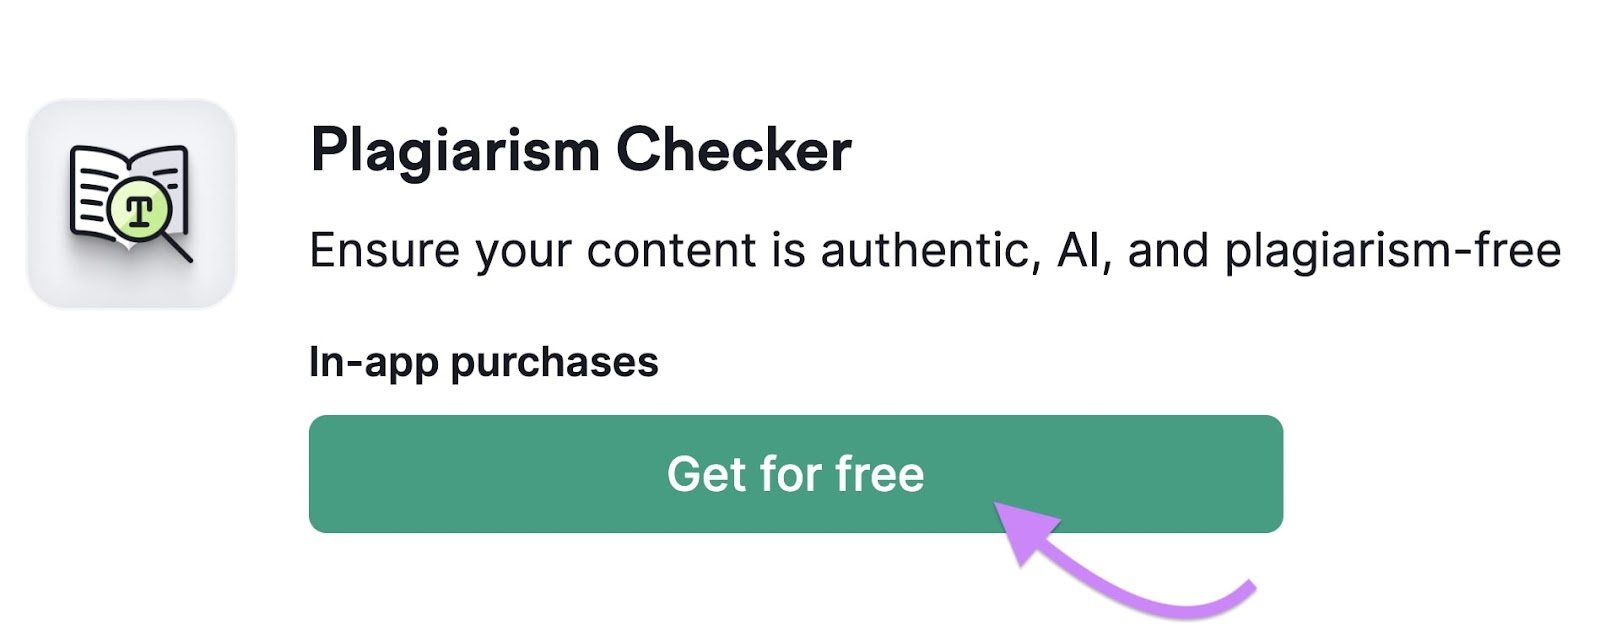 "Get for free" button on Plagiarism Checker page